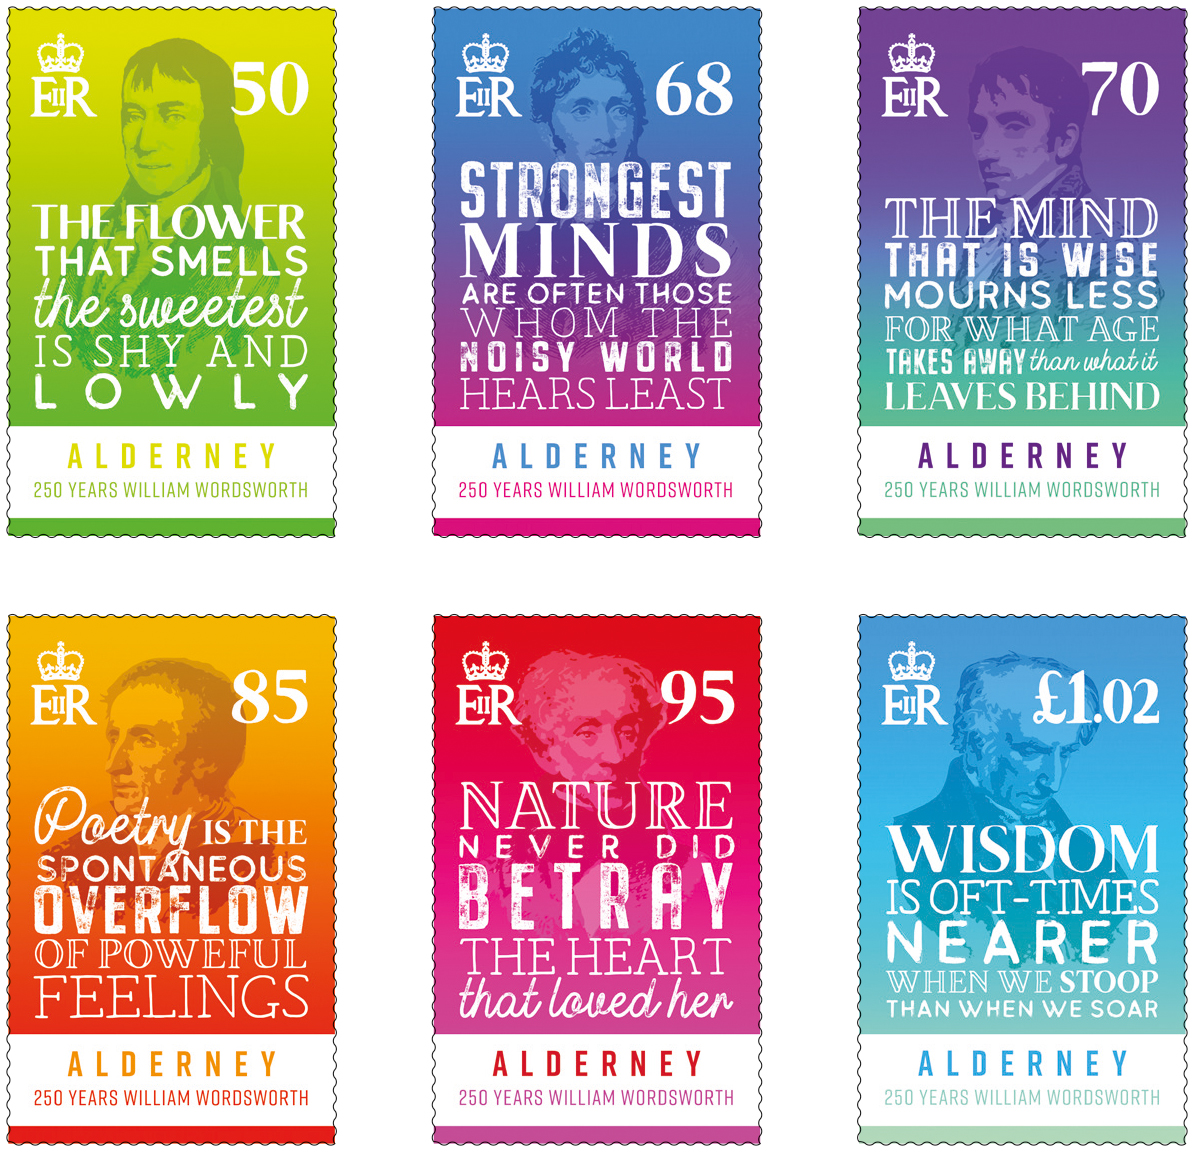 Guernsey Post to issue Alderney stamps to mark 250th Anniversary of Wordsworth's birth